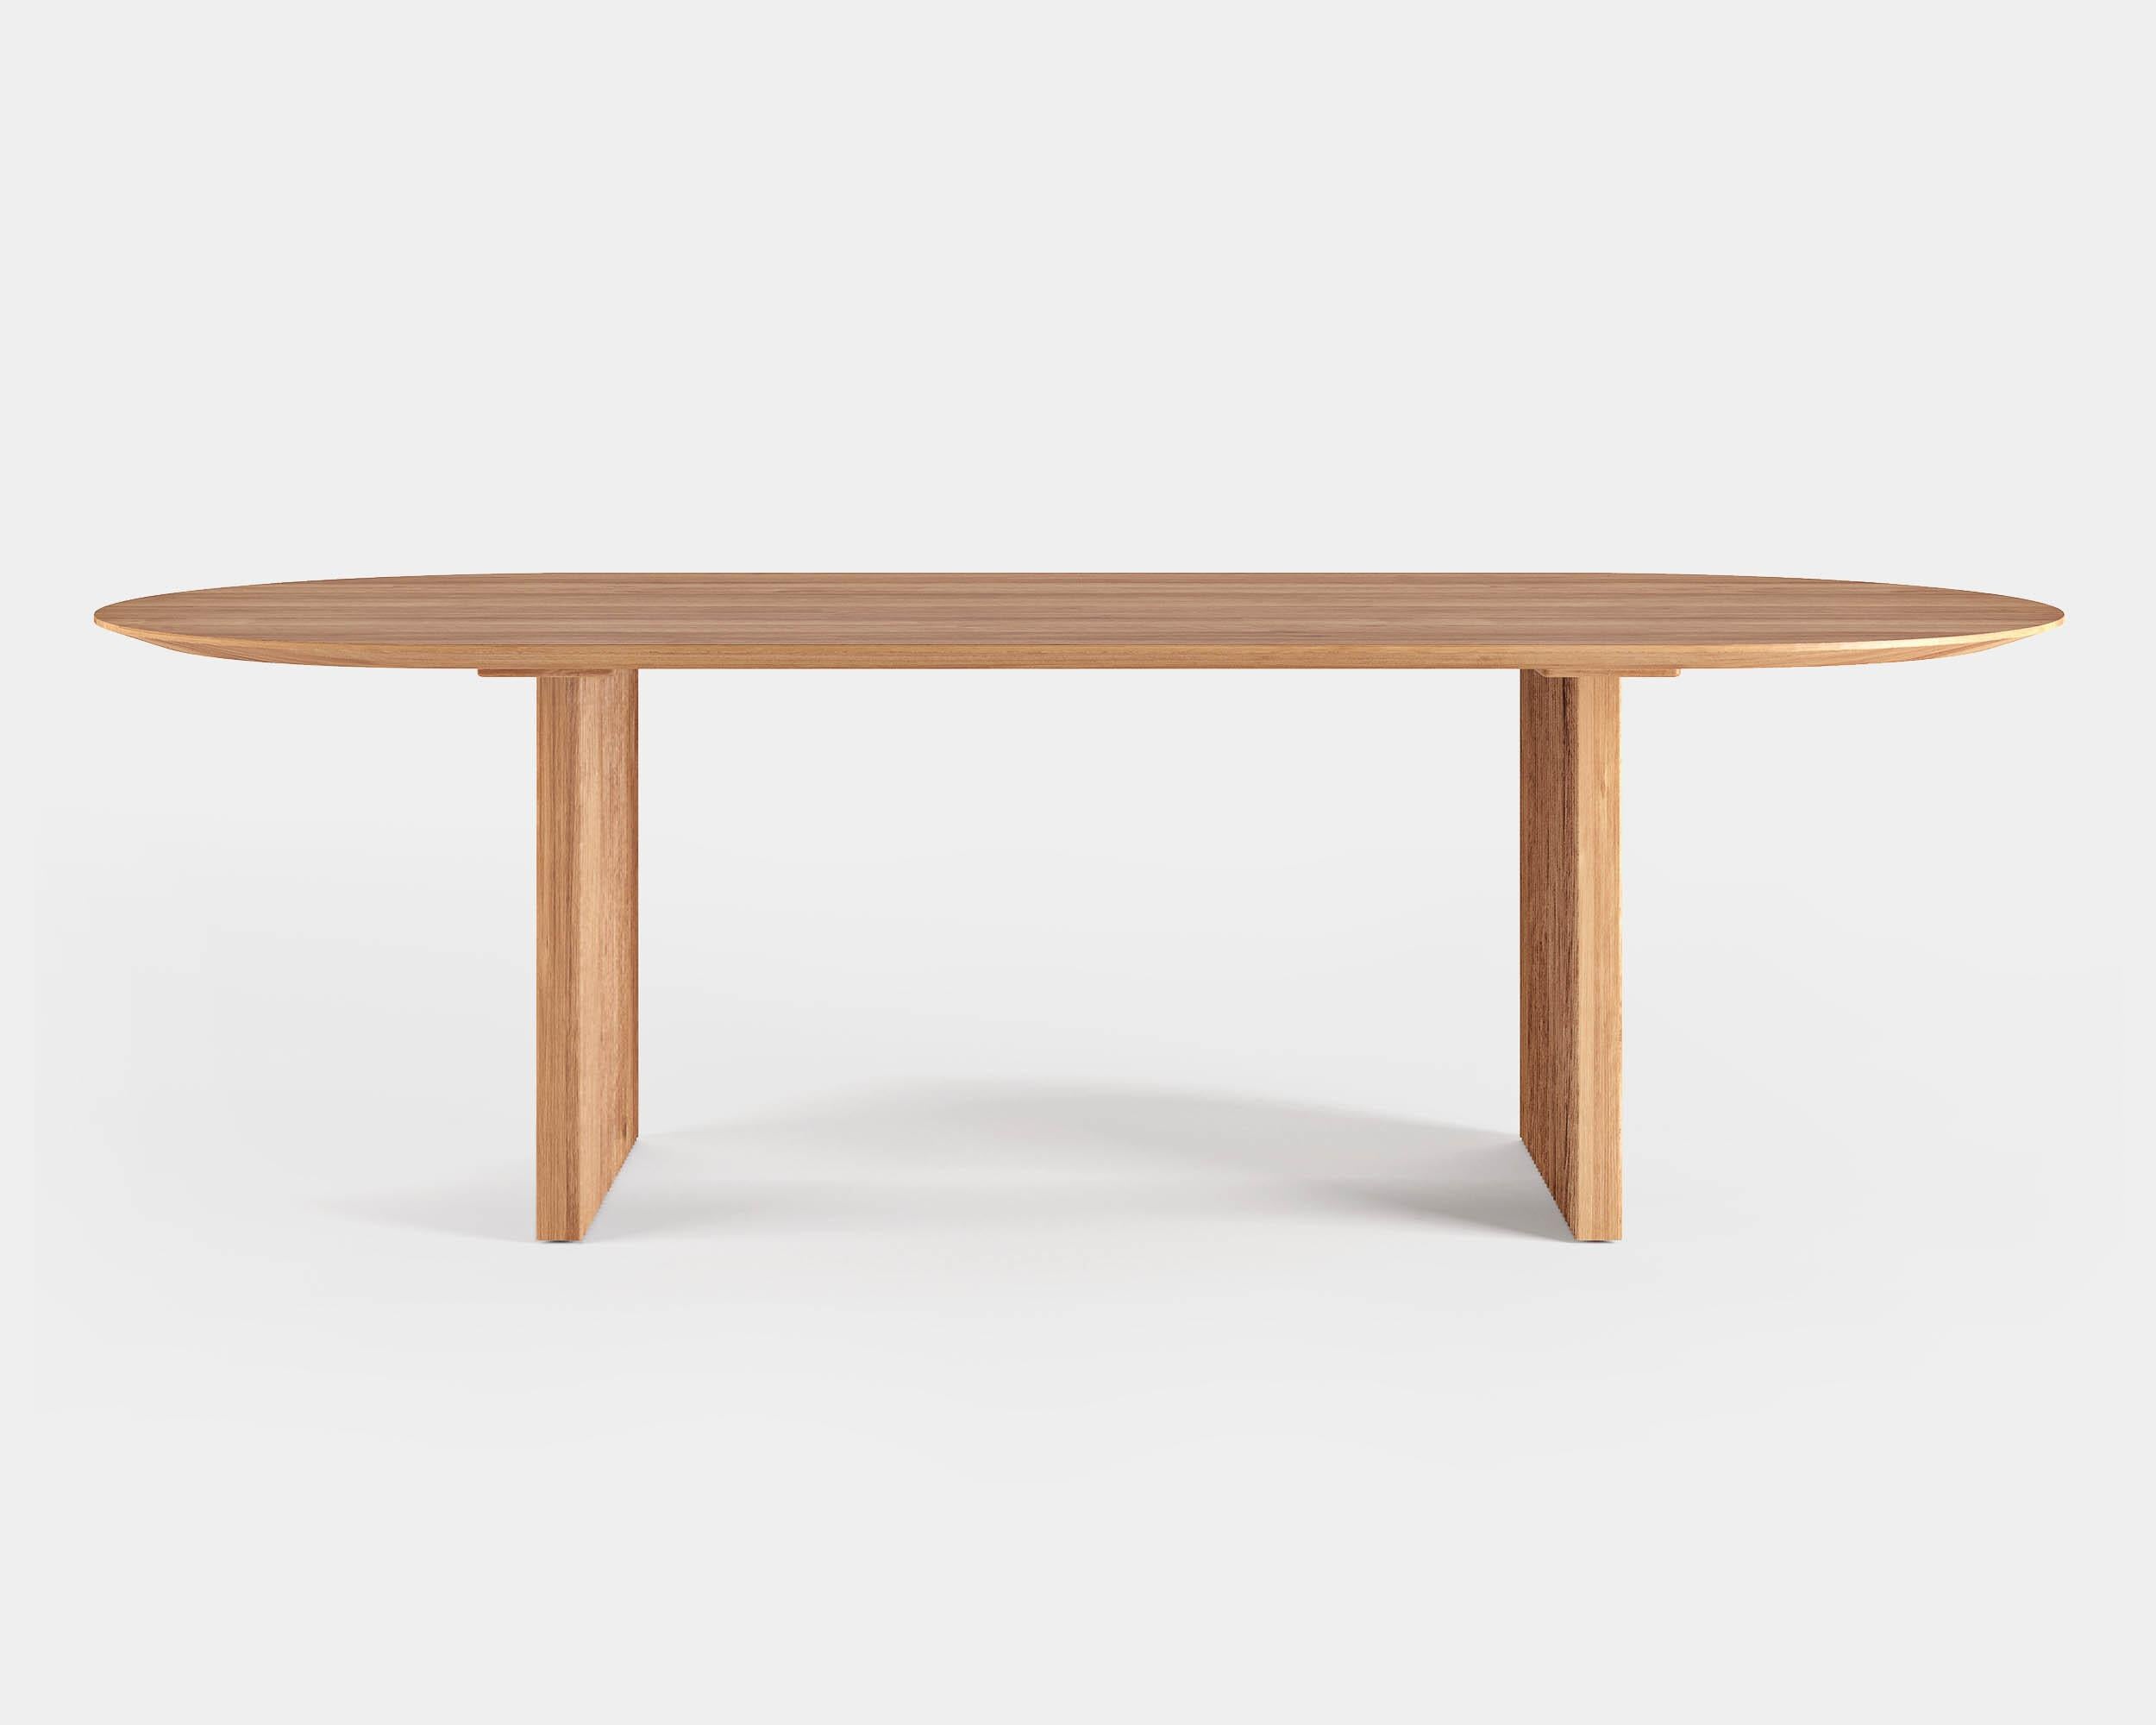 Ten dining table, oval, 200cm.
Solid wood tabletop and legs. Handmade in Denmark. 

Measures: Height: 72 or 74 cm.

Tabletop dimensions:
– 200 x 95 cm
– 240 x 105 cm
– 270 x 105 cm
– 300 x 105 cm
– 340 x 105 cm
– 370 x 105 cm
– 400 x 105